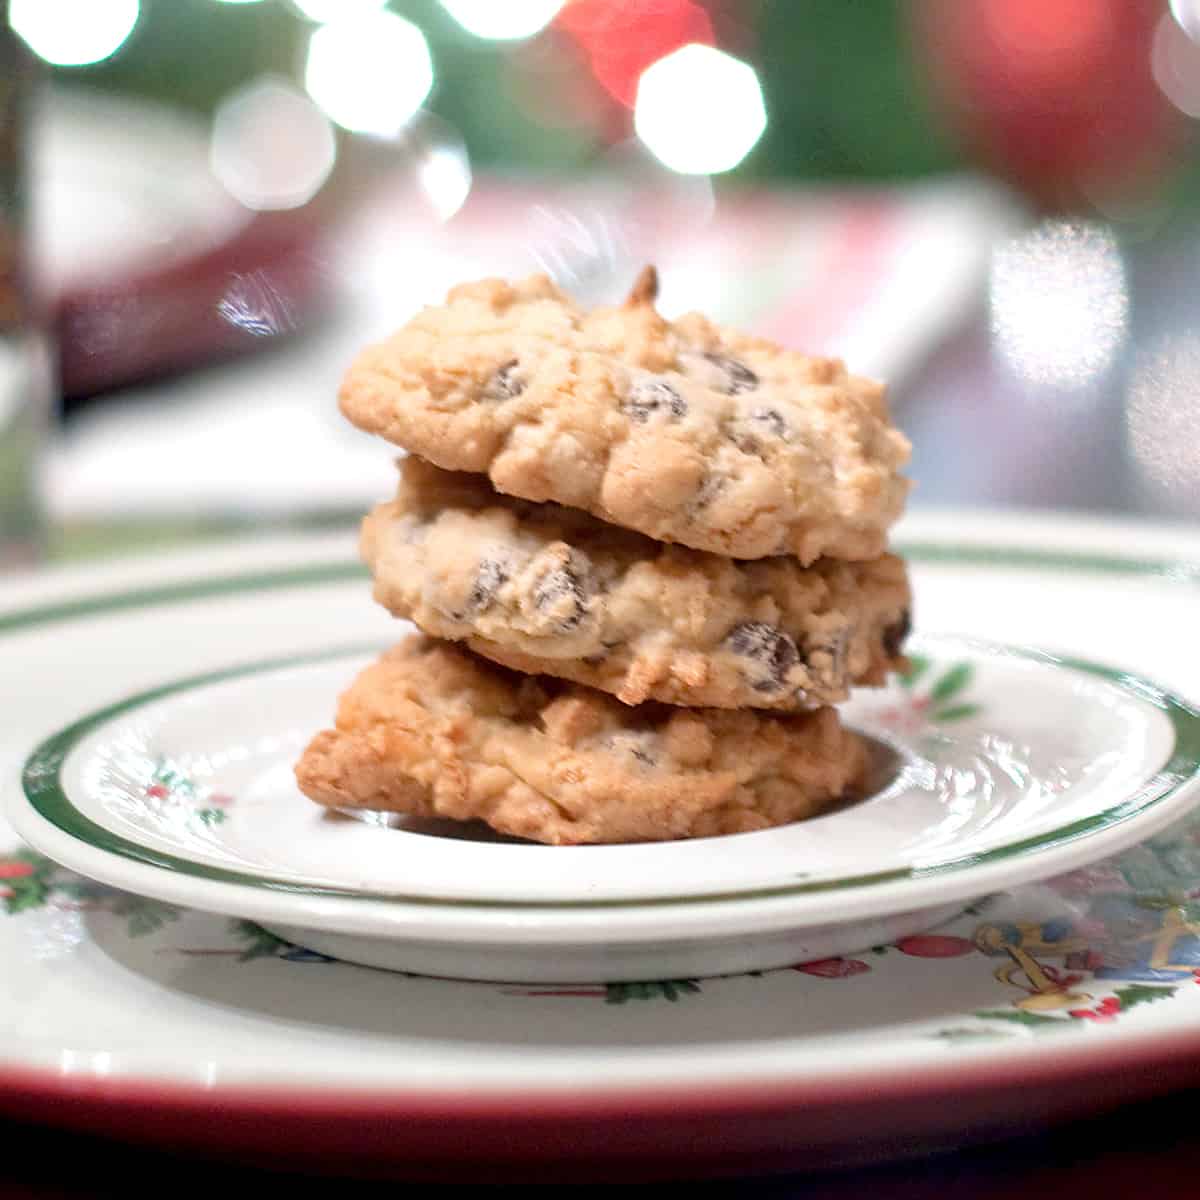 Almond Joy Cookies on a Christmas plate with twinkling lights in the background.